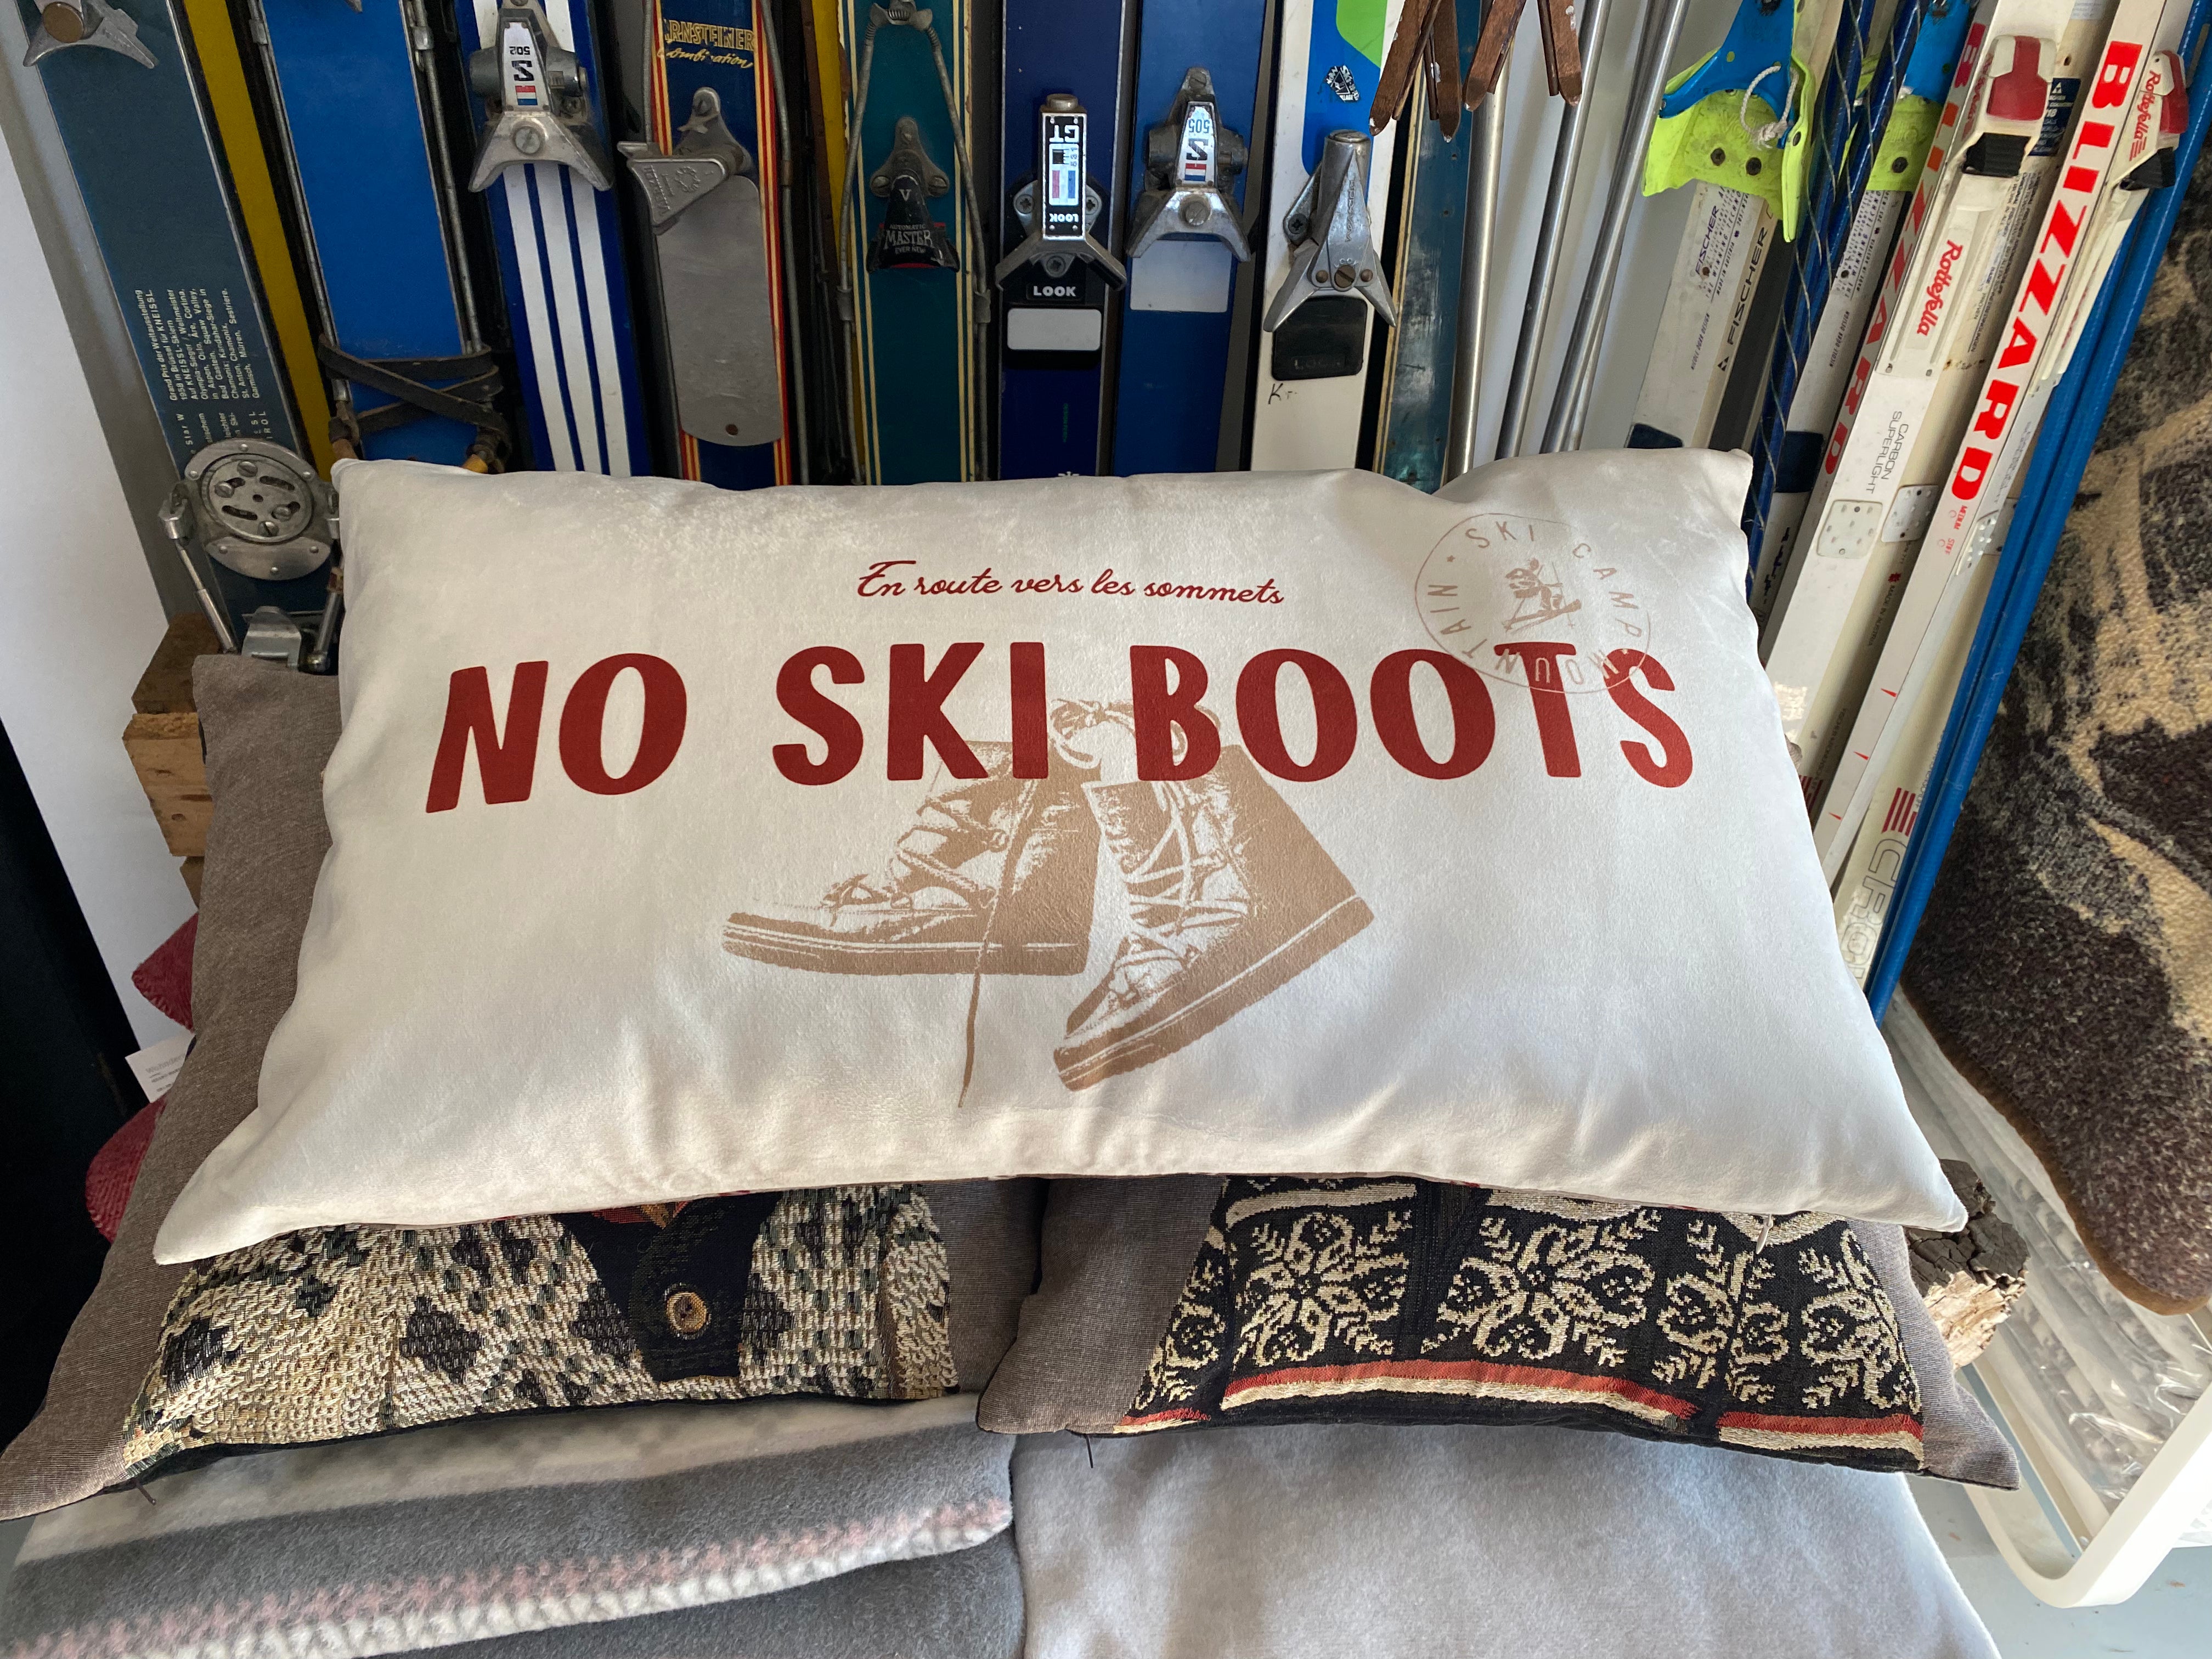 No Ski Boots Cushions sitting on top of other cushions and leaning against a backdrop of old skis